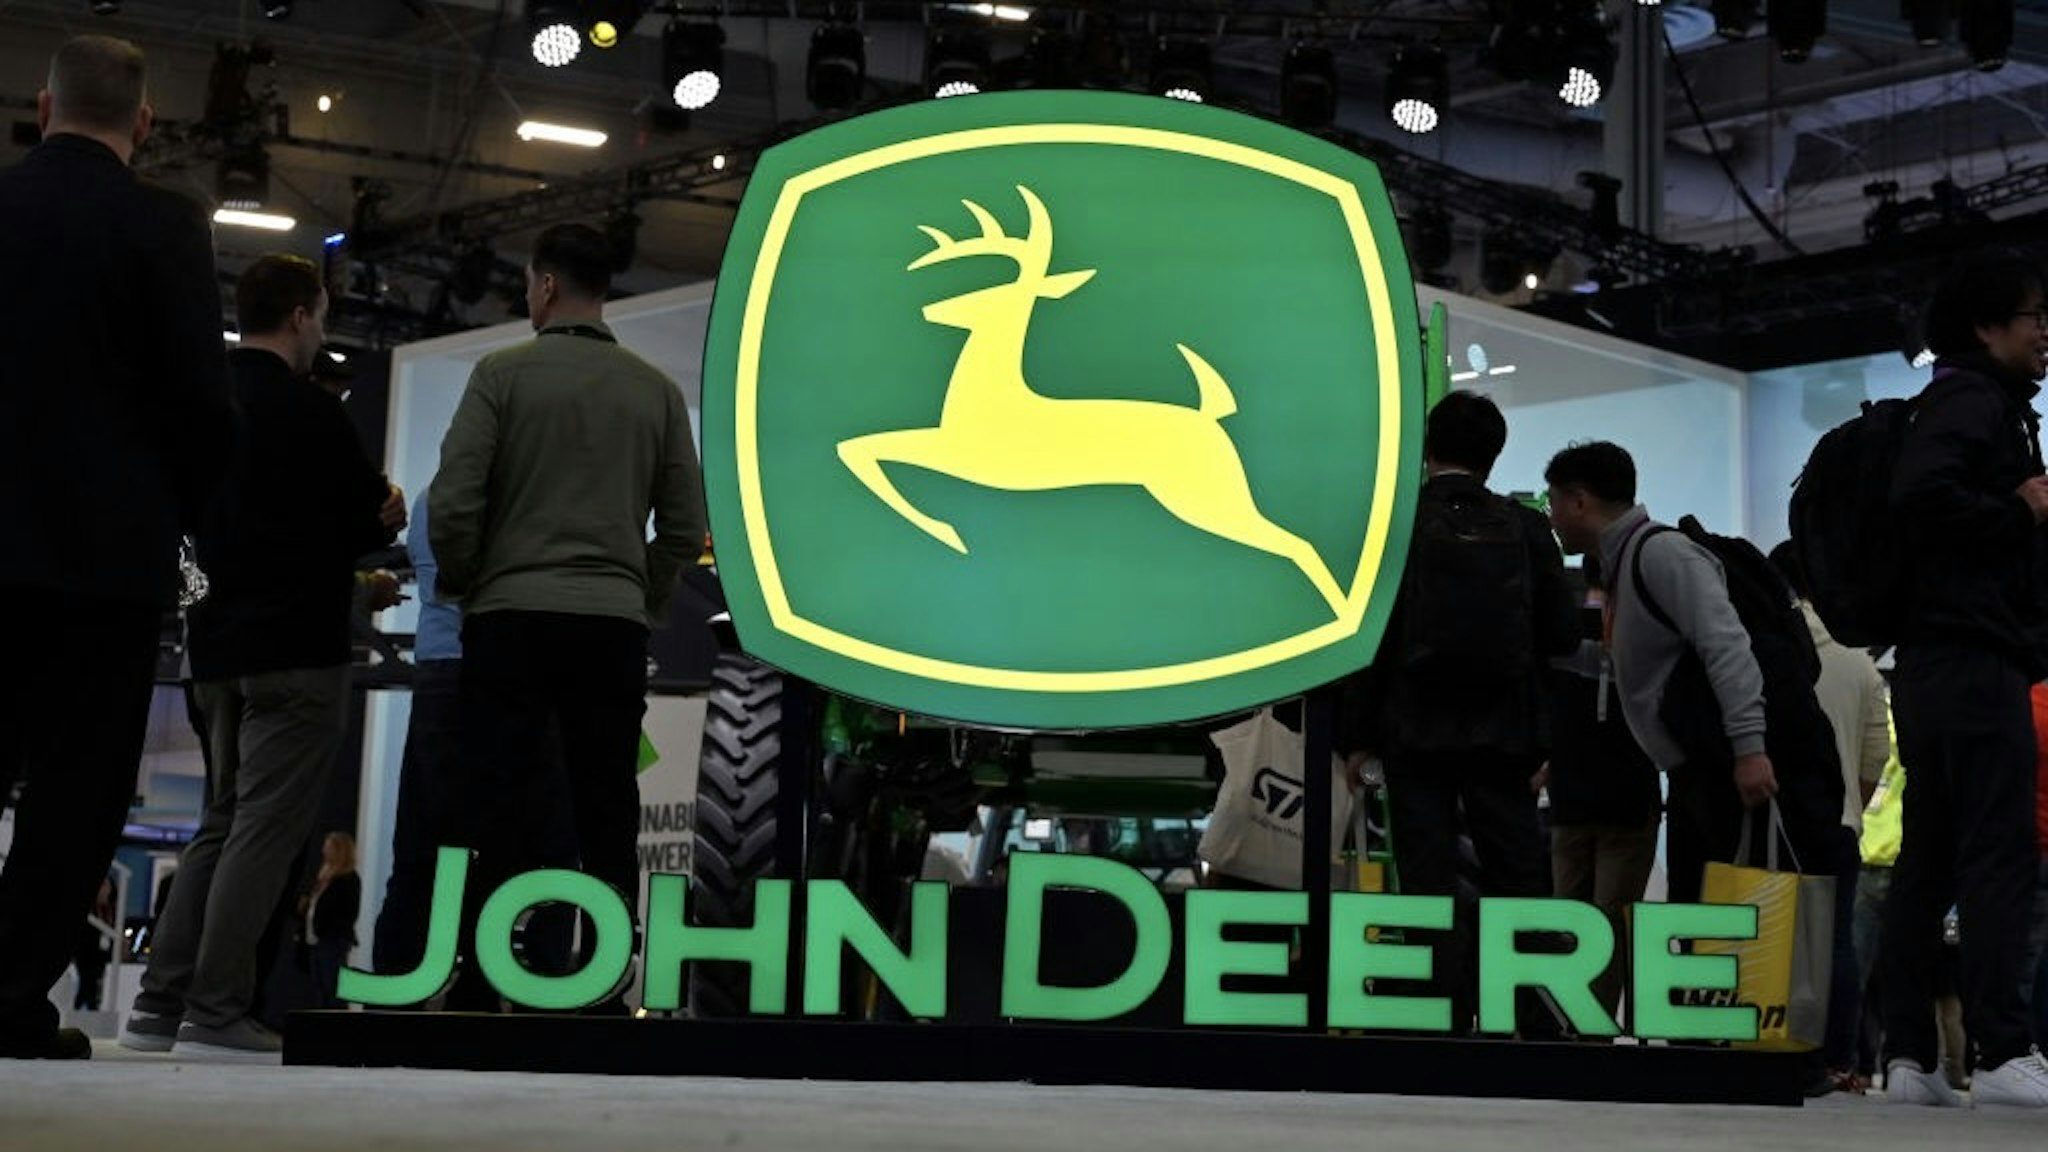 Las Vegas Hosts Annual CES Trade Show LAS VEGAS, NEVADA - JANUARY 05: John Deere booth signage is displayed at CES 2023 at the Las Vegas Convention Center on January 6, 2023 in Las Vegas, Nevada. CES, the world's largest annual consumer technology trade show, runs through January 08 and features about 3,200 exhibitors showing off their latest products and services to more than 100,000 attendees. (Photo by David Becker/Getty Images) David Becker / Stringer